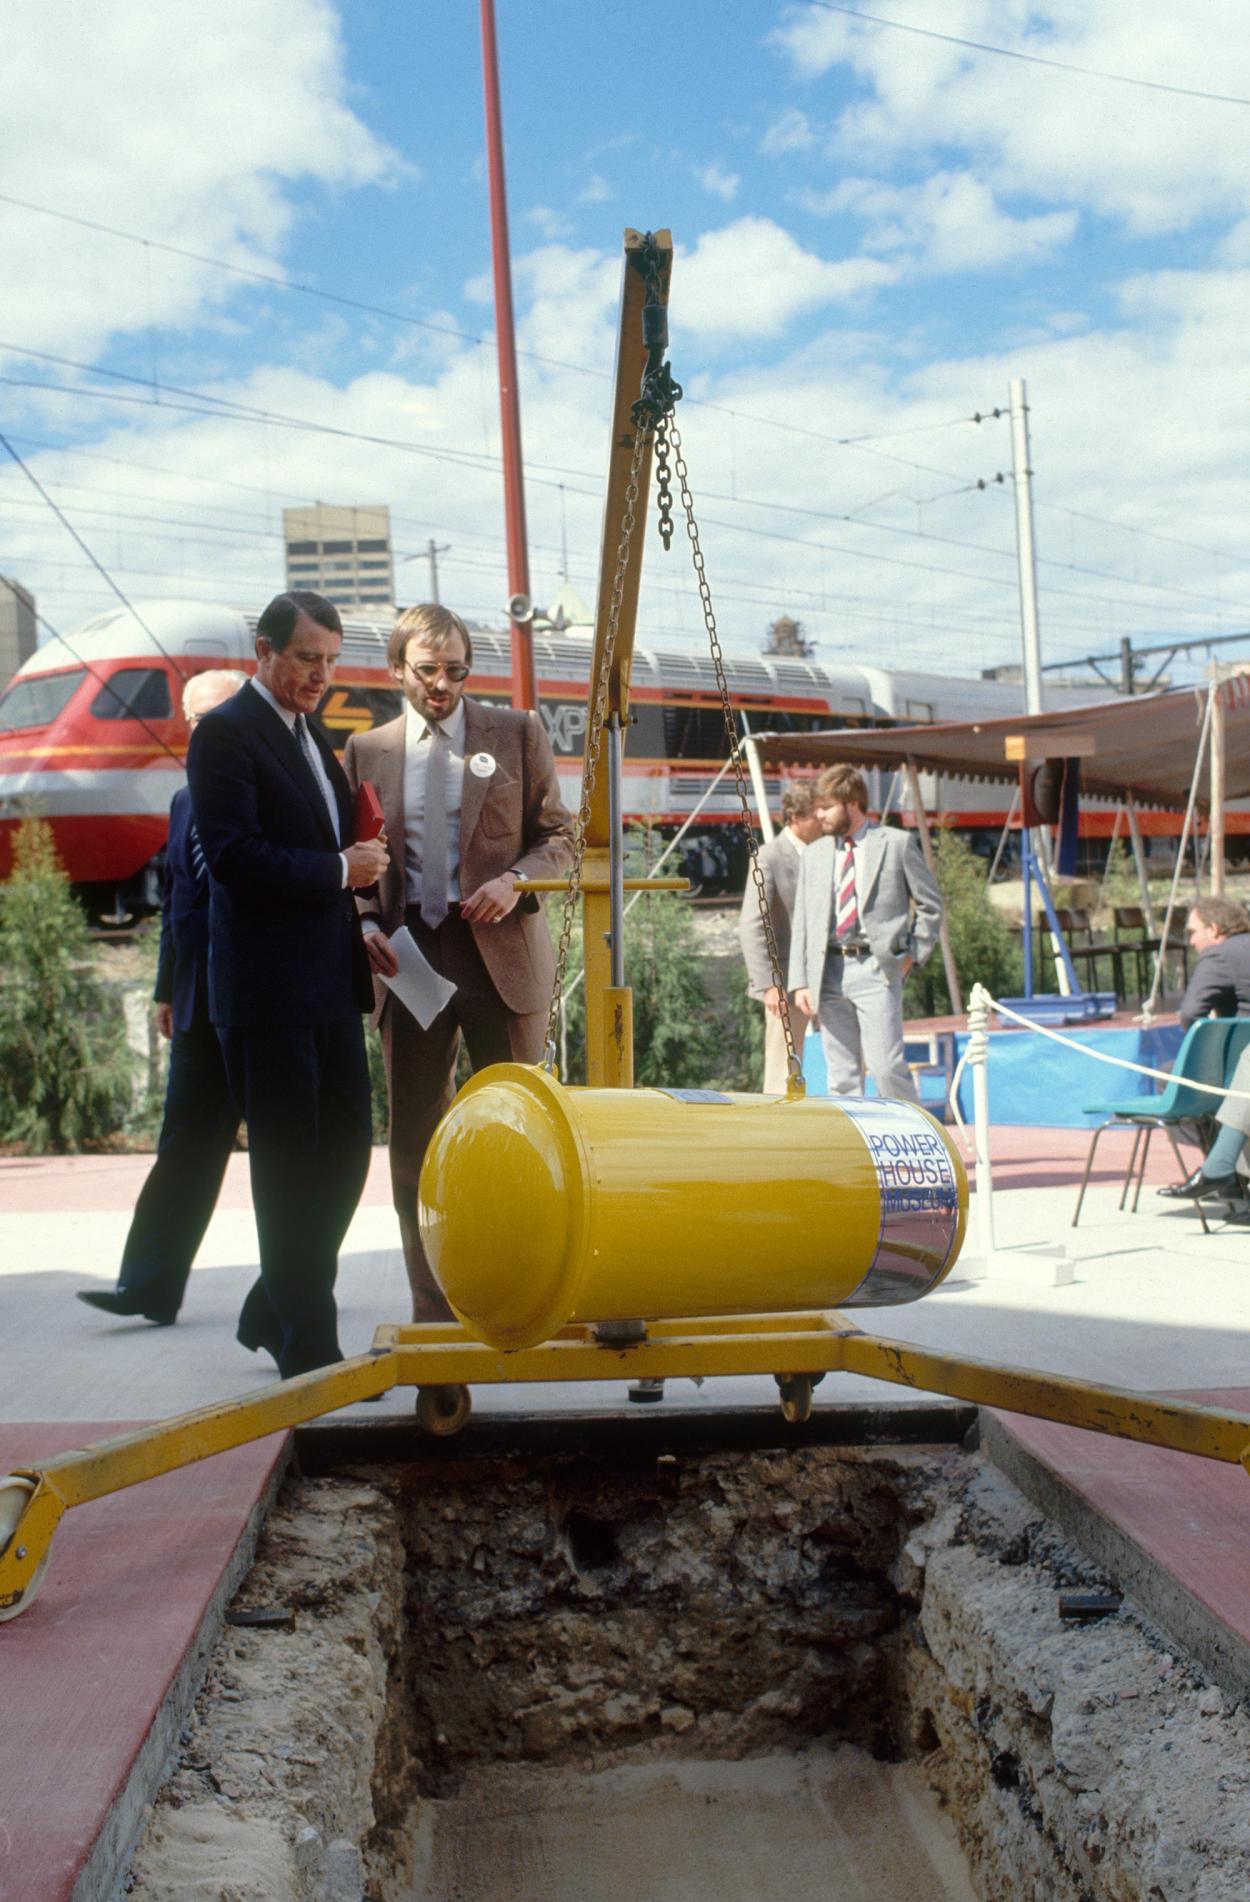 Photograph of a time capsule being lowered into the ground